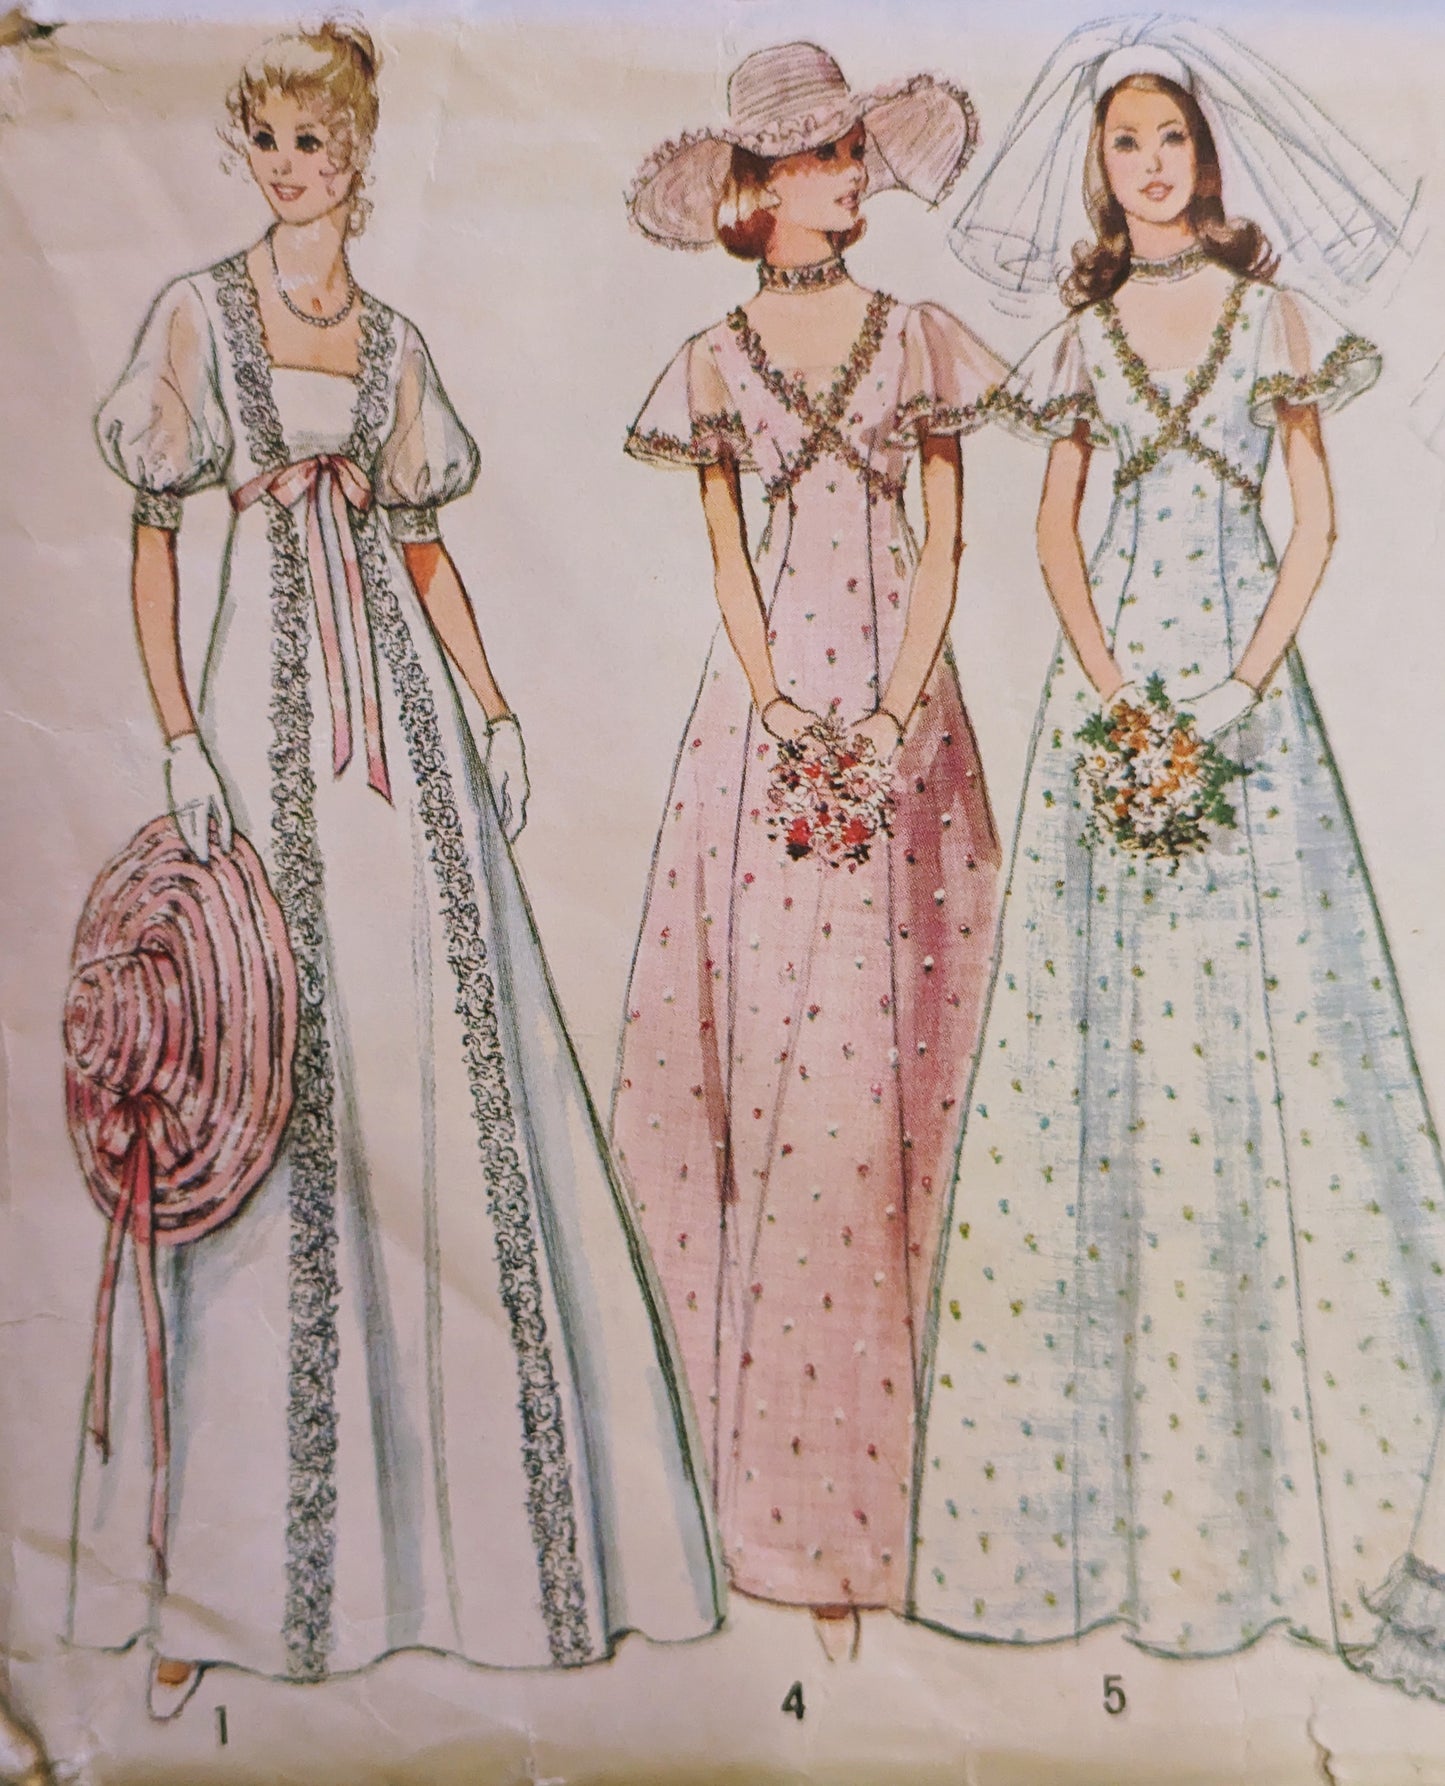 1974 Simplicity #6399 Gunne Sax Style Wedding and Bride's Maid Prairie Cottage Dresses | Sewing Pattern